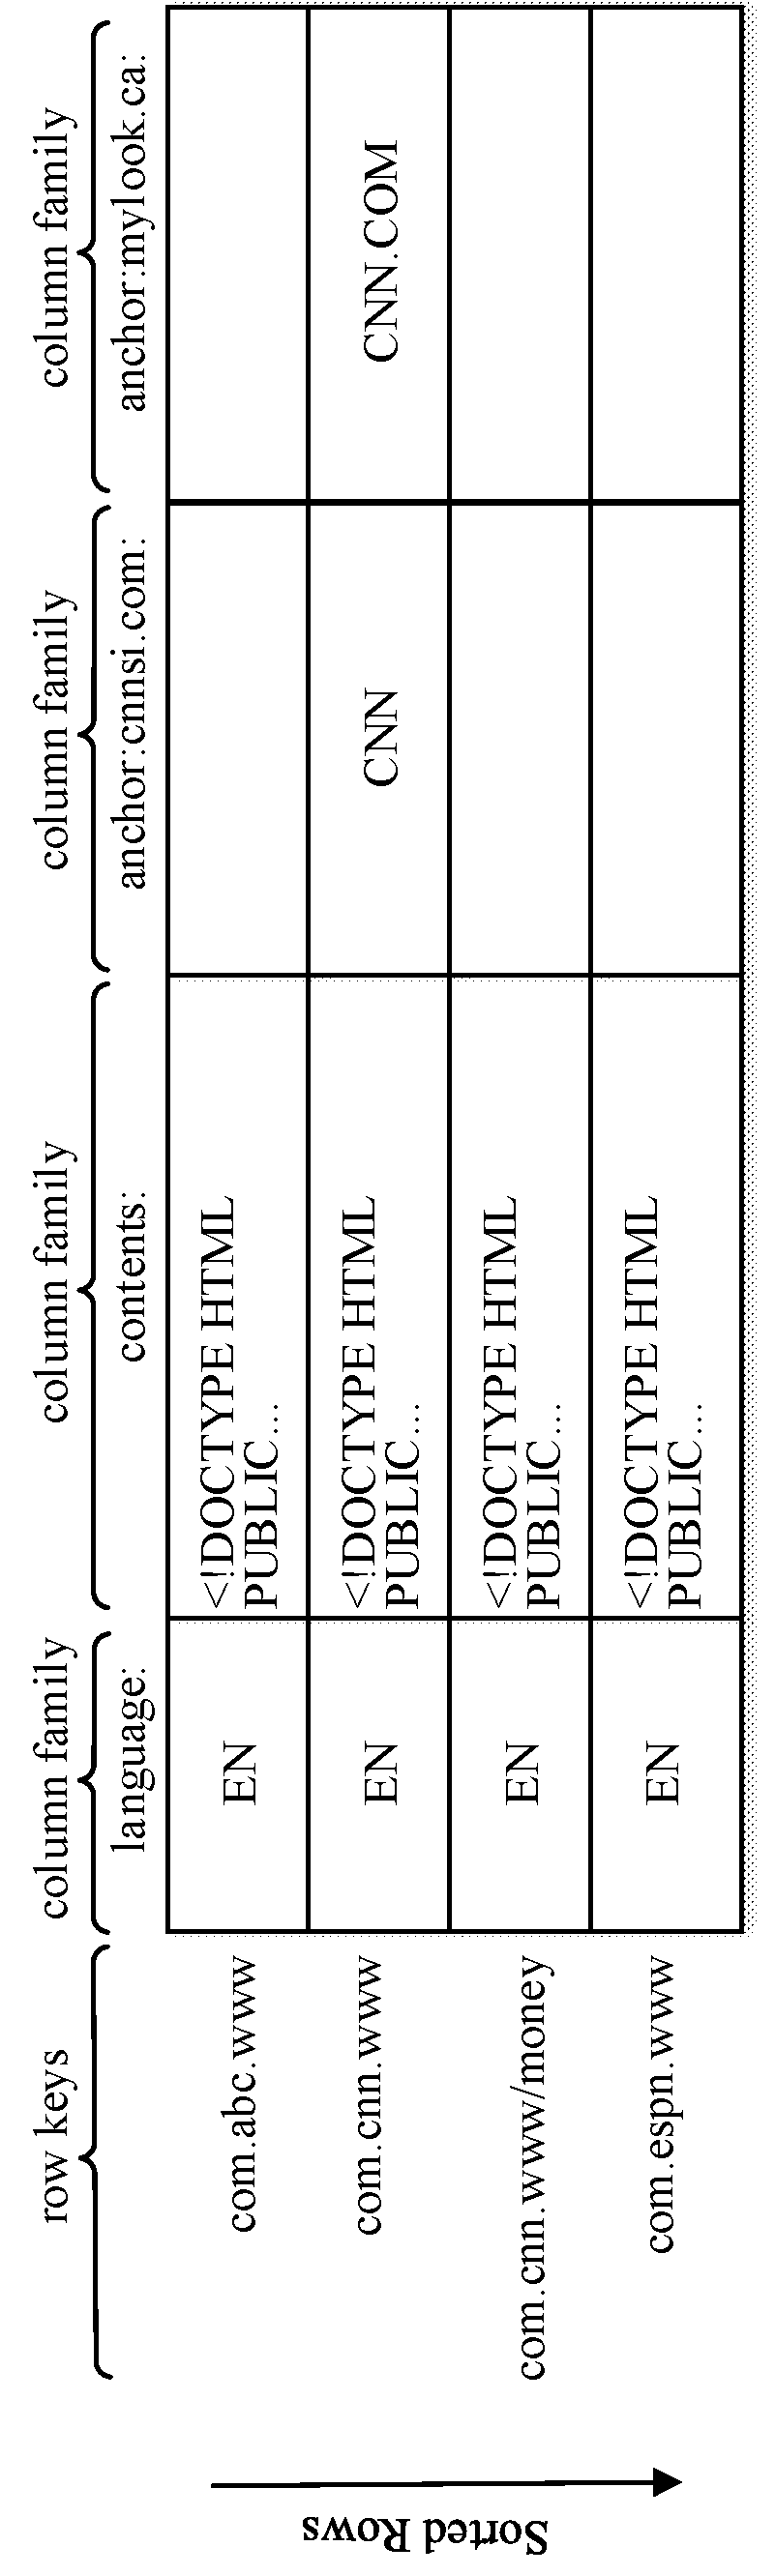 Data transition in highly parallel database management system